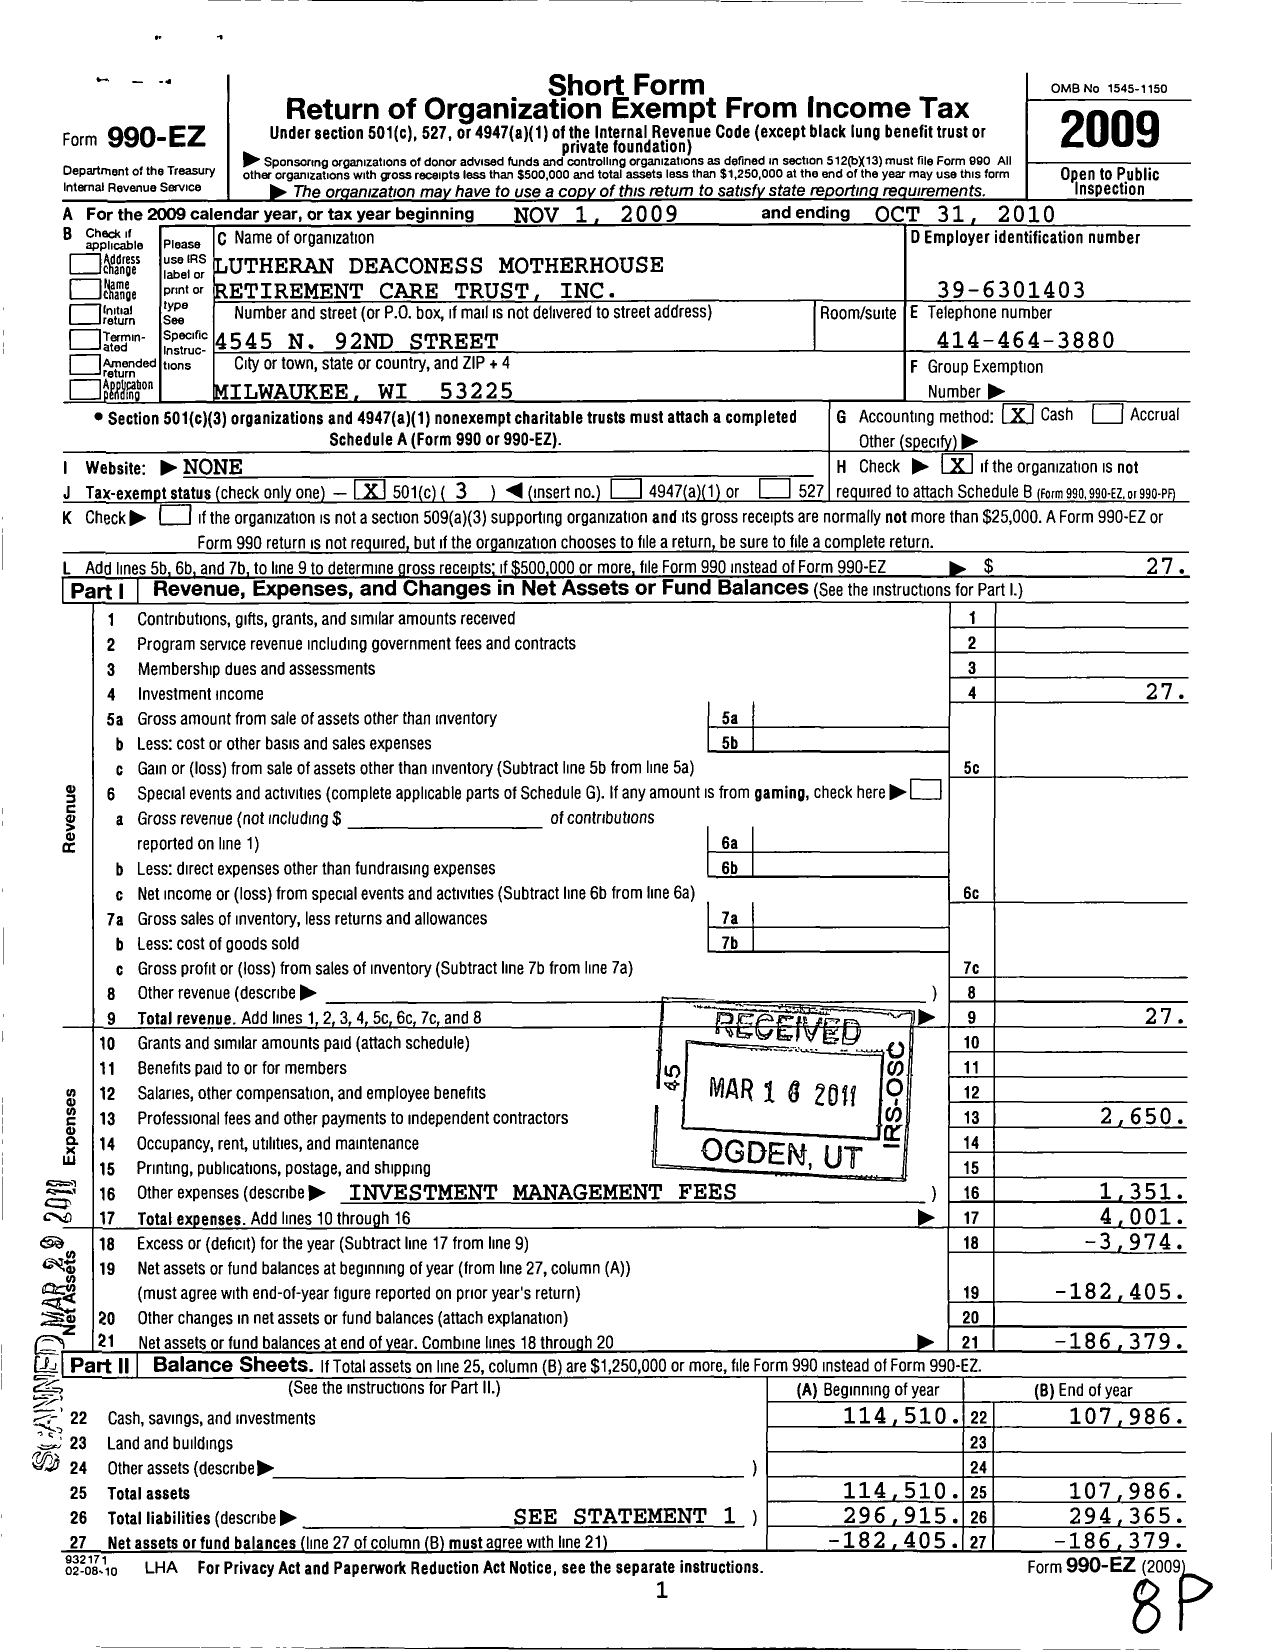 Image of first page of 2009 Form 990EZ for Lutheran Deaconess Motherhouse Retirement Care Trust